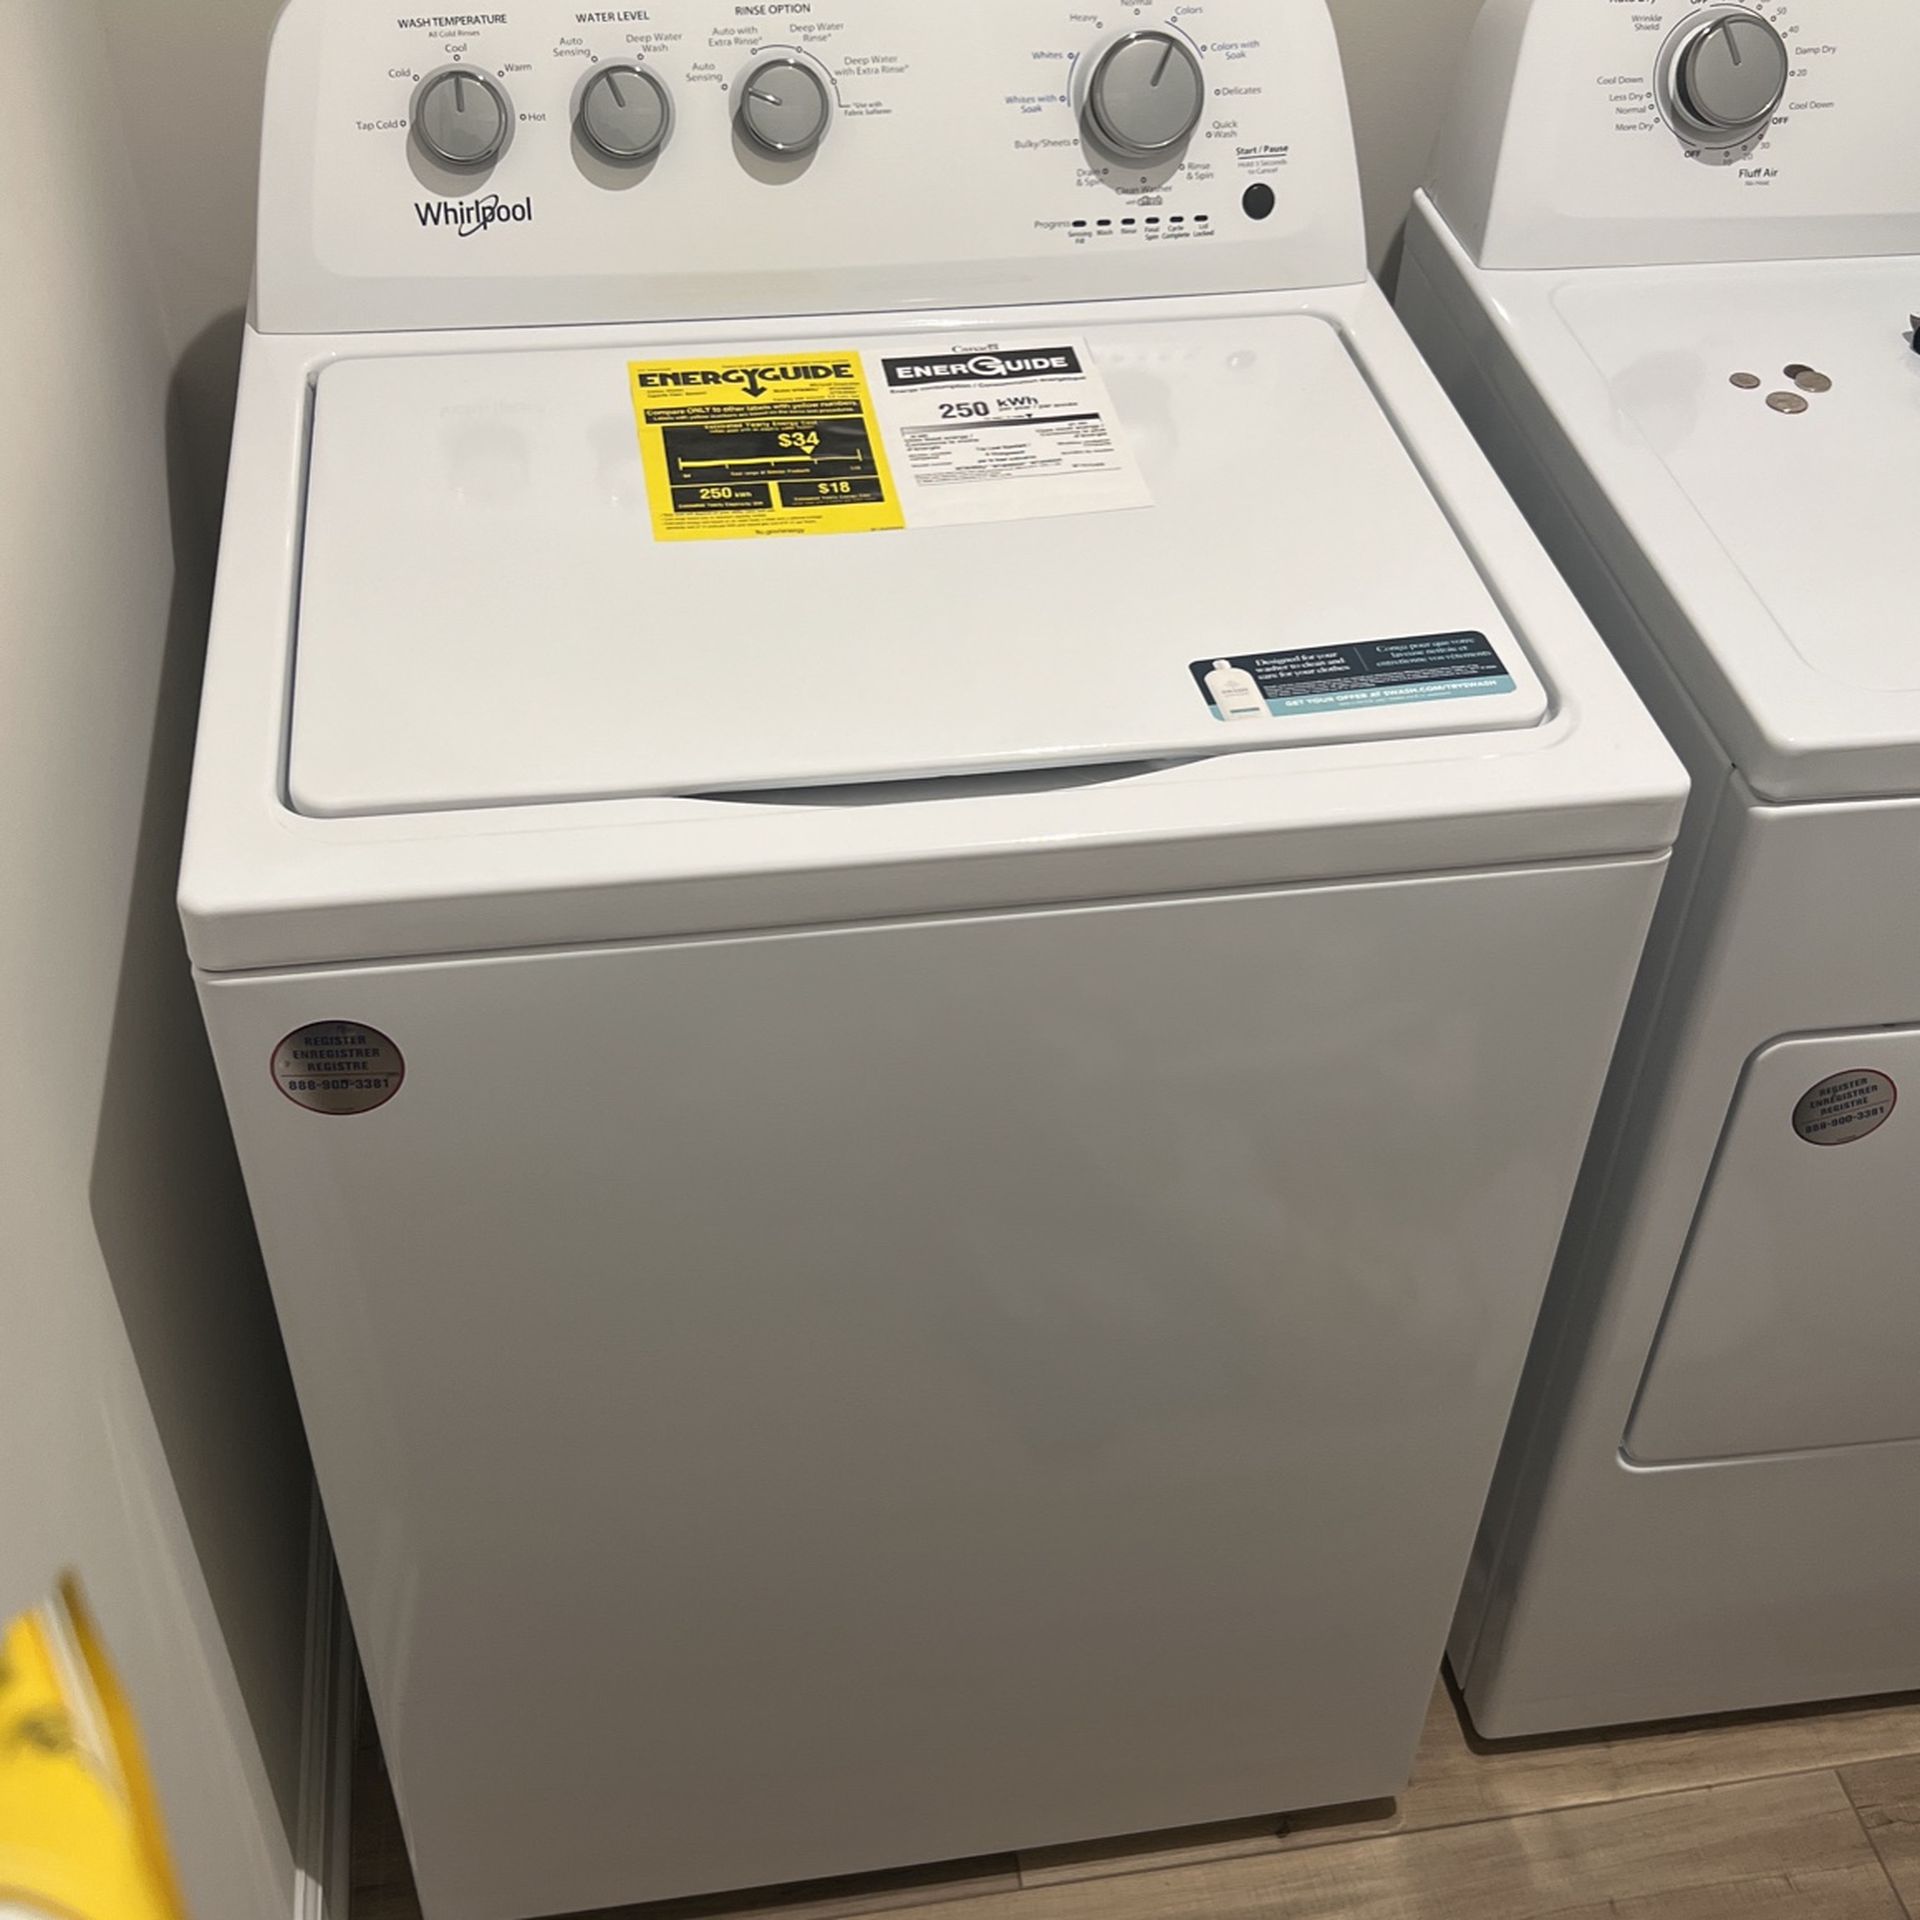 Whirlpool Refrigerator, Washer And Dryer